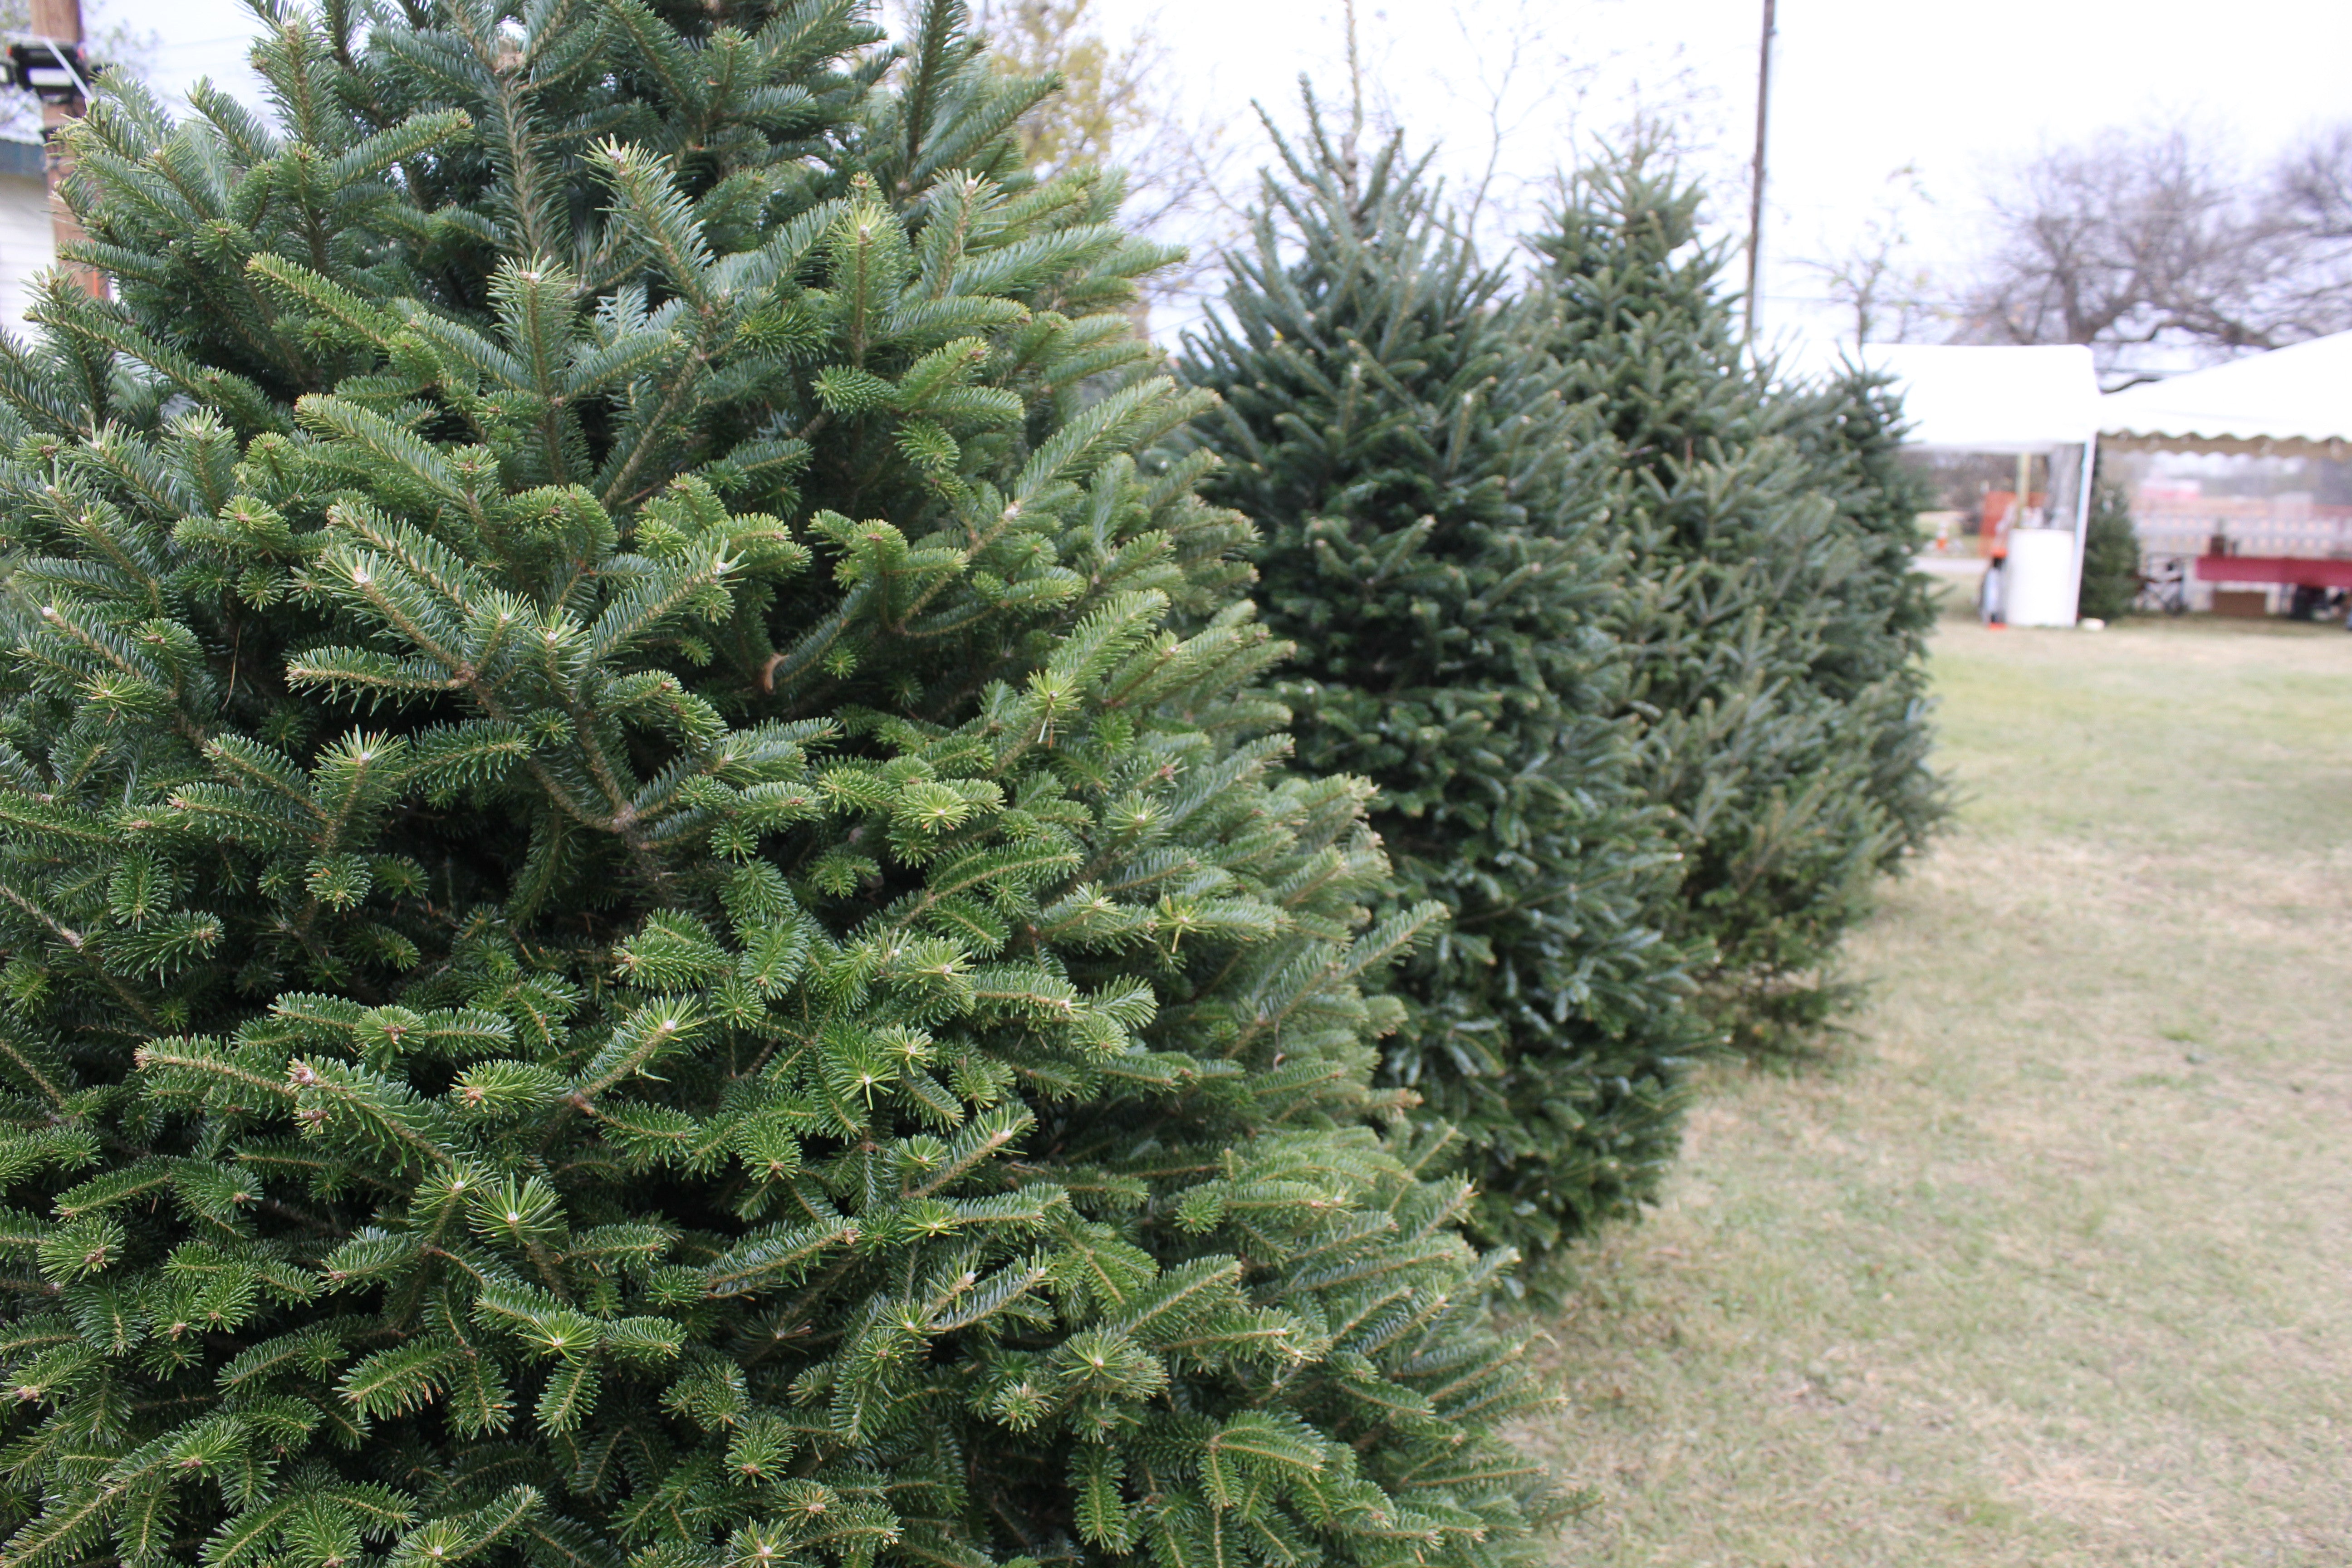 Season Update: The effects of the Christmas Tree shortage